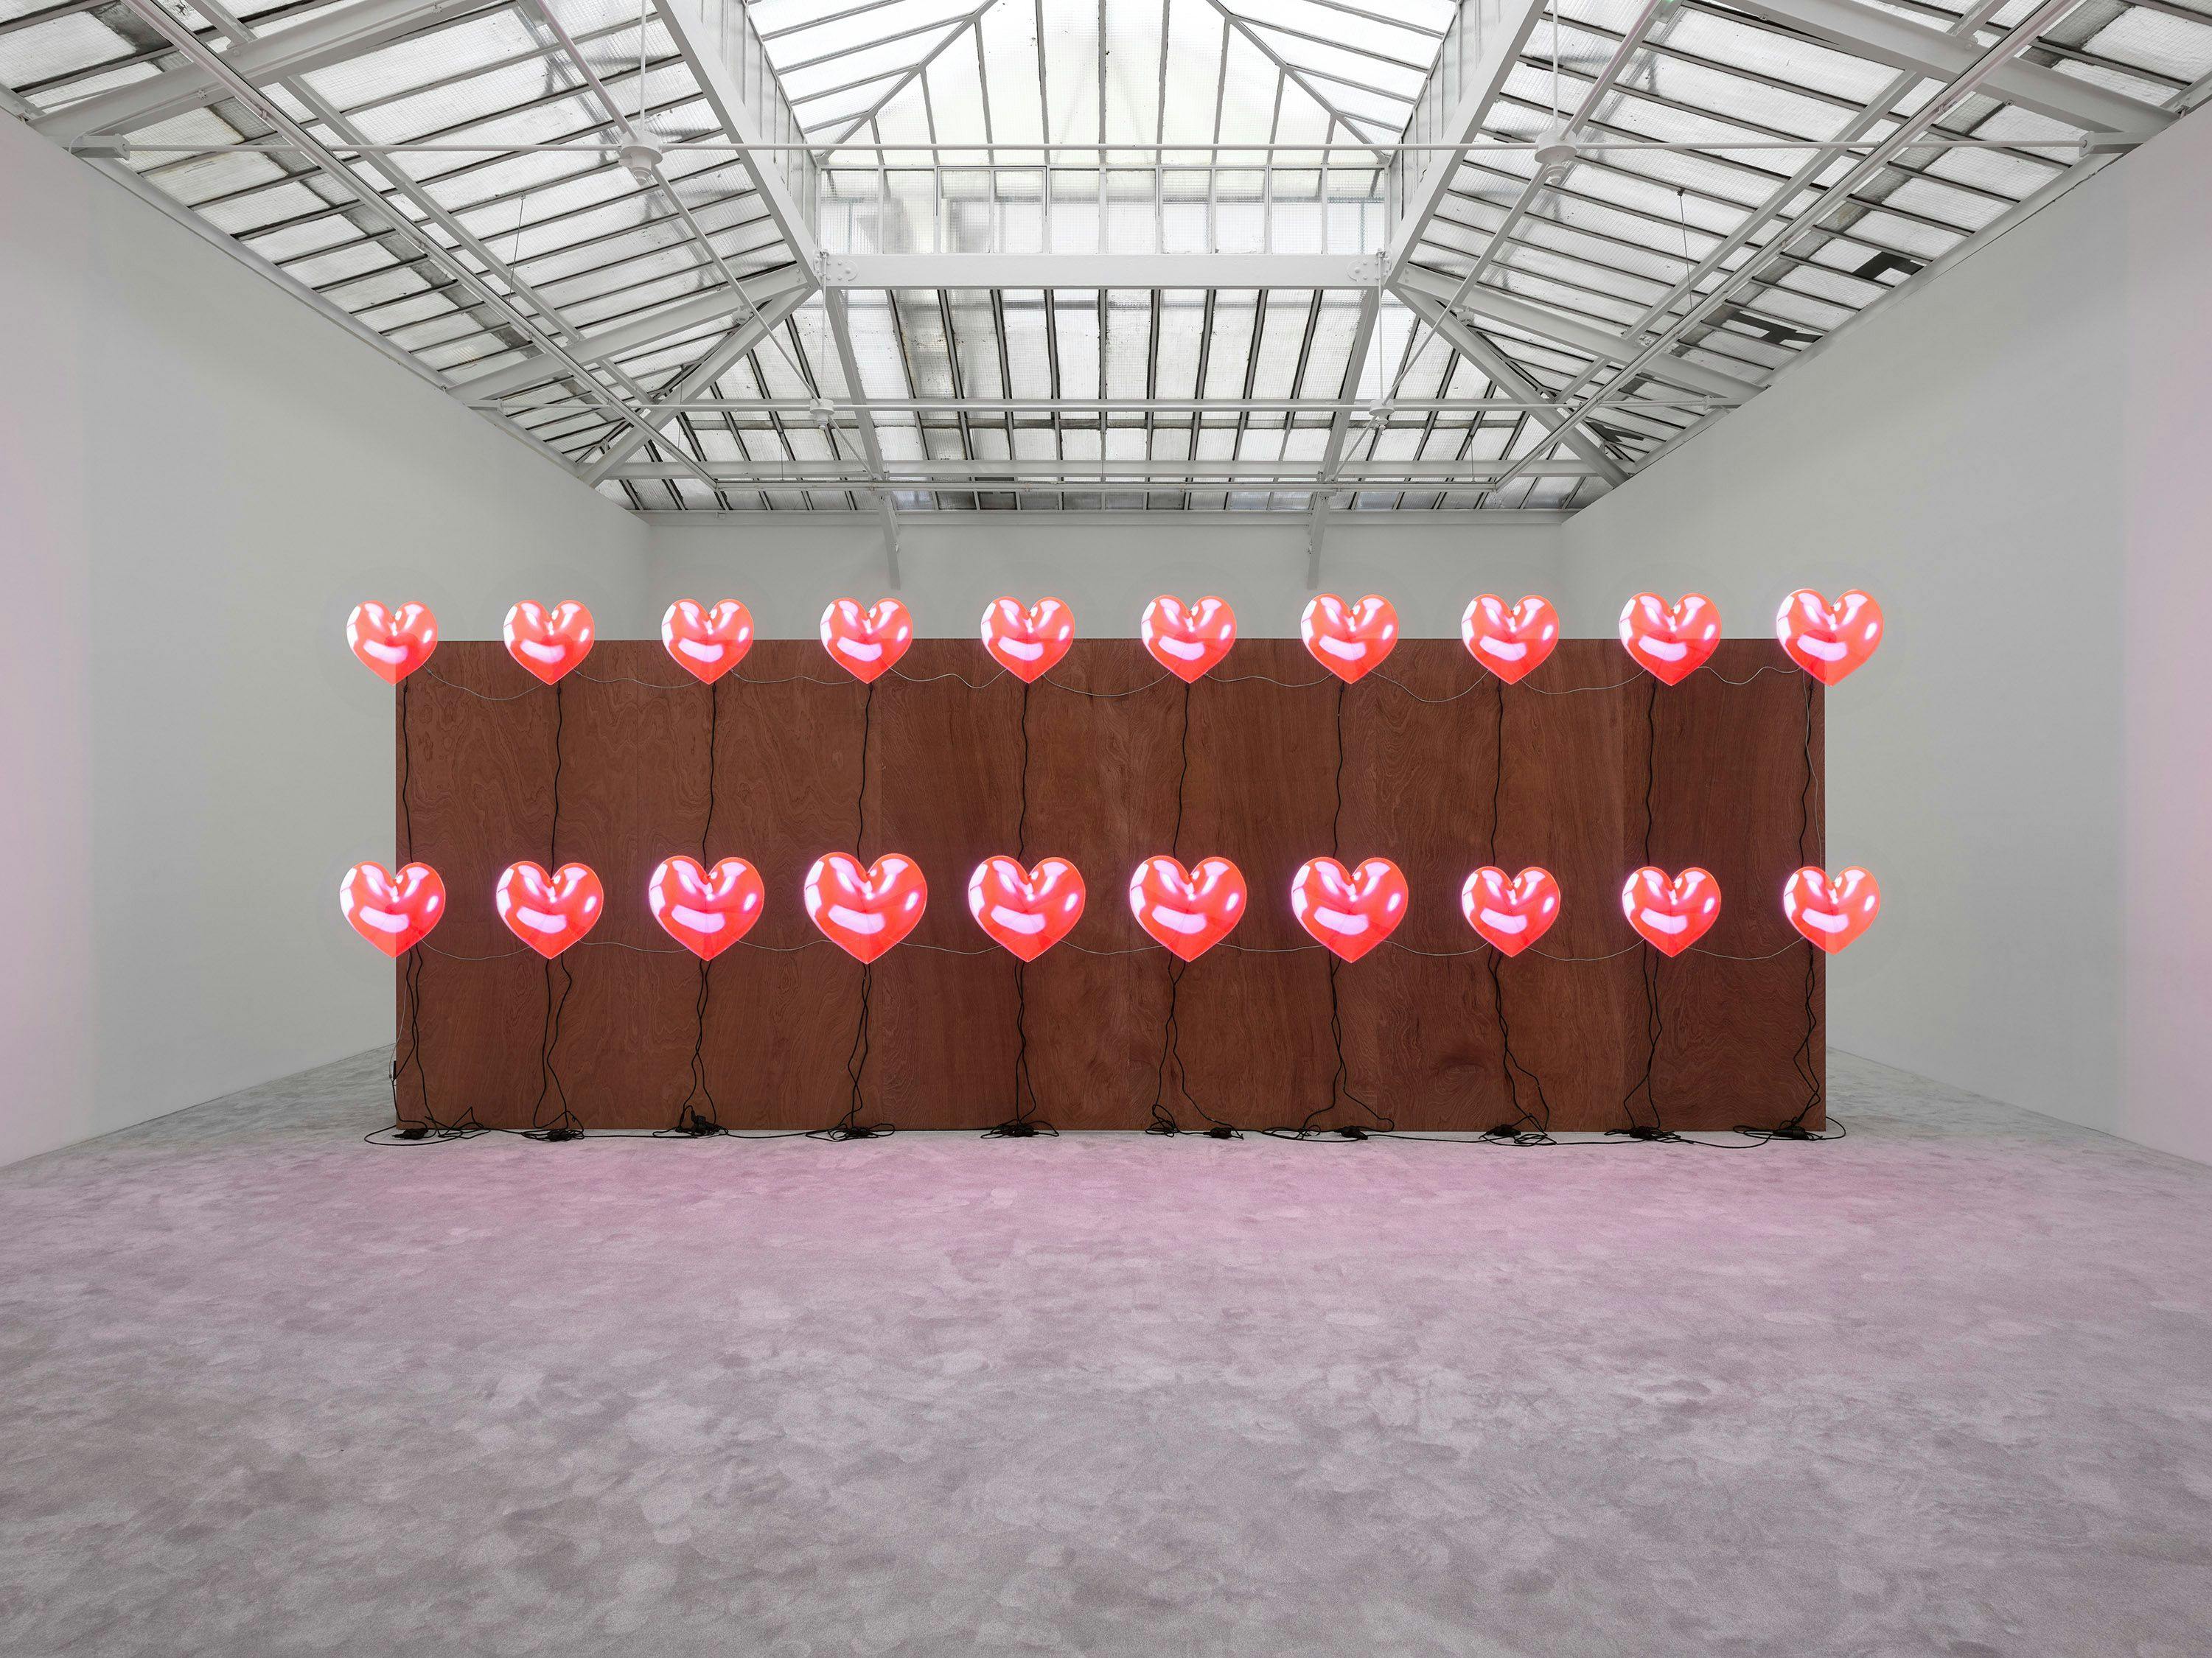 Twenty holographic displays mounted on freestanding plywood wall with mixed media by Jordan Wolfson, titled ARTISTS FRIENDS RACISTS, 2019 to 2020.